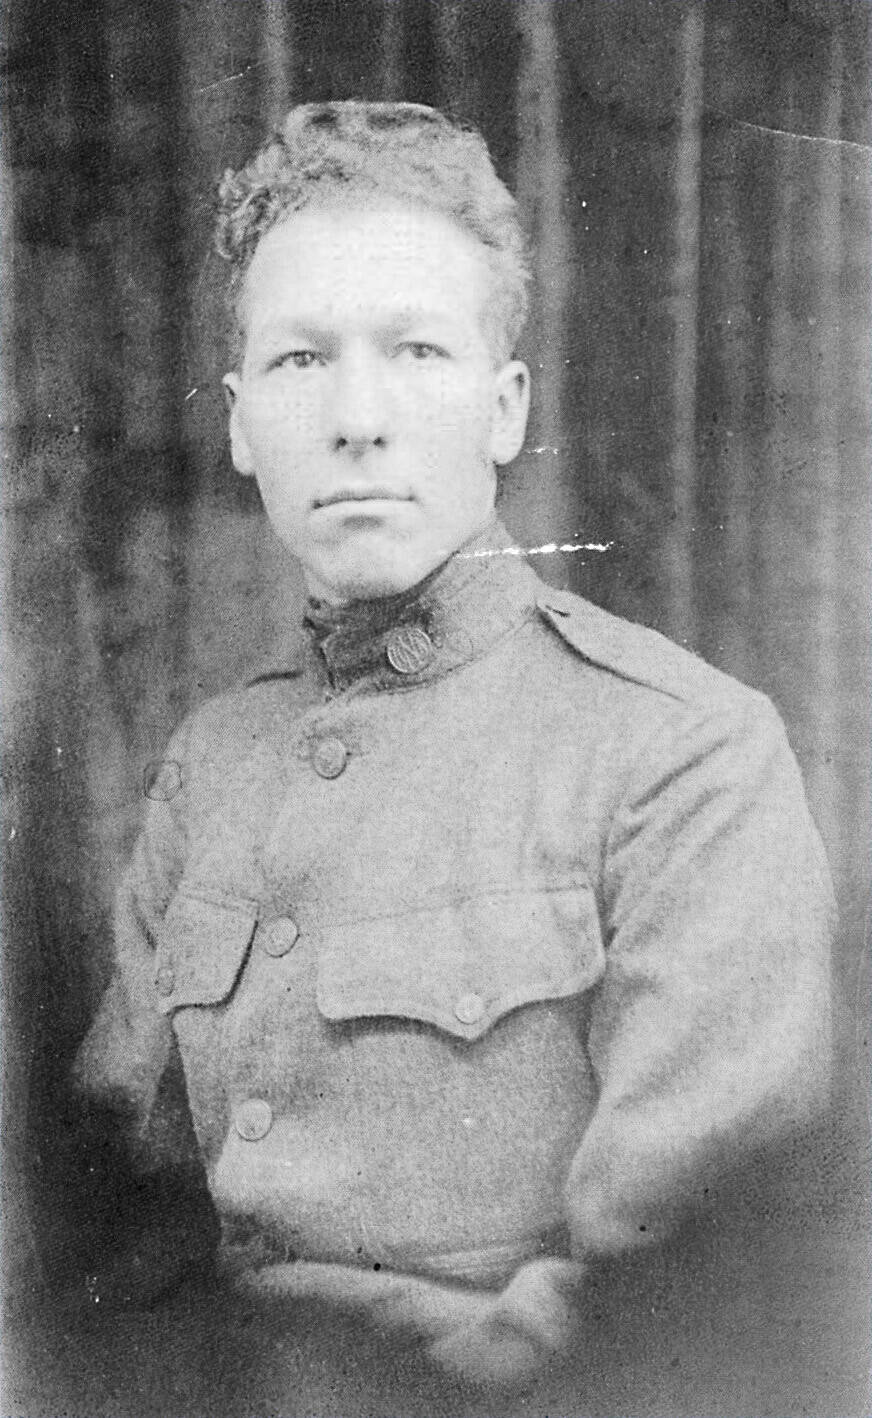 Photo courtesy of the Brennan Family Collection
This photo of John Floyd King was taken during his U.S. Army service during World War I. Written beneath the photo was “Some soldier, eh!”